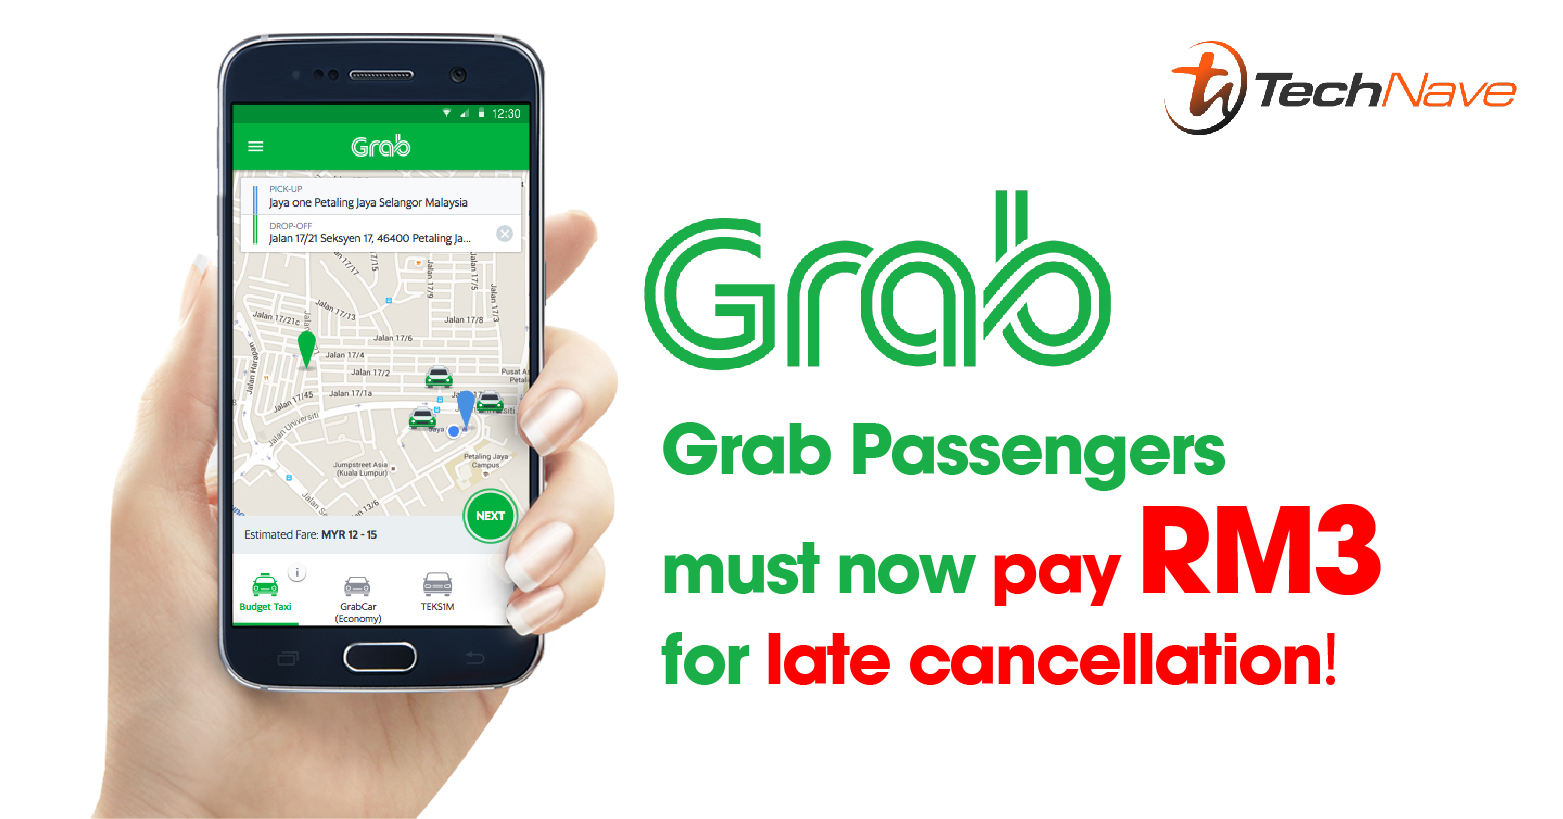 Grab Passengers must now pay RM3 for late cancellation and passanger no-show